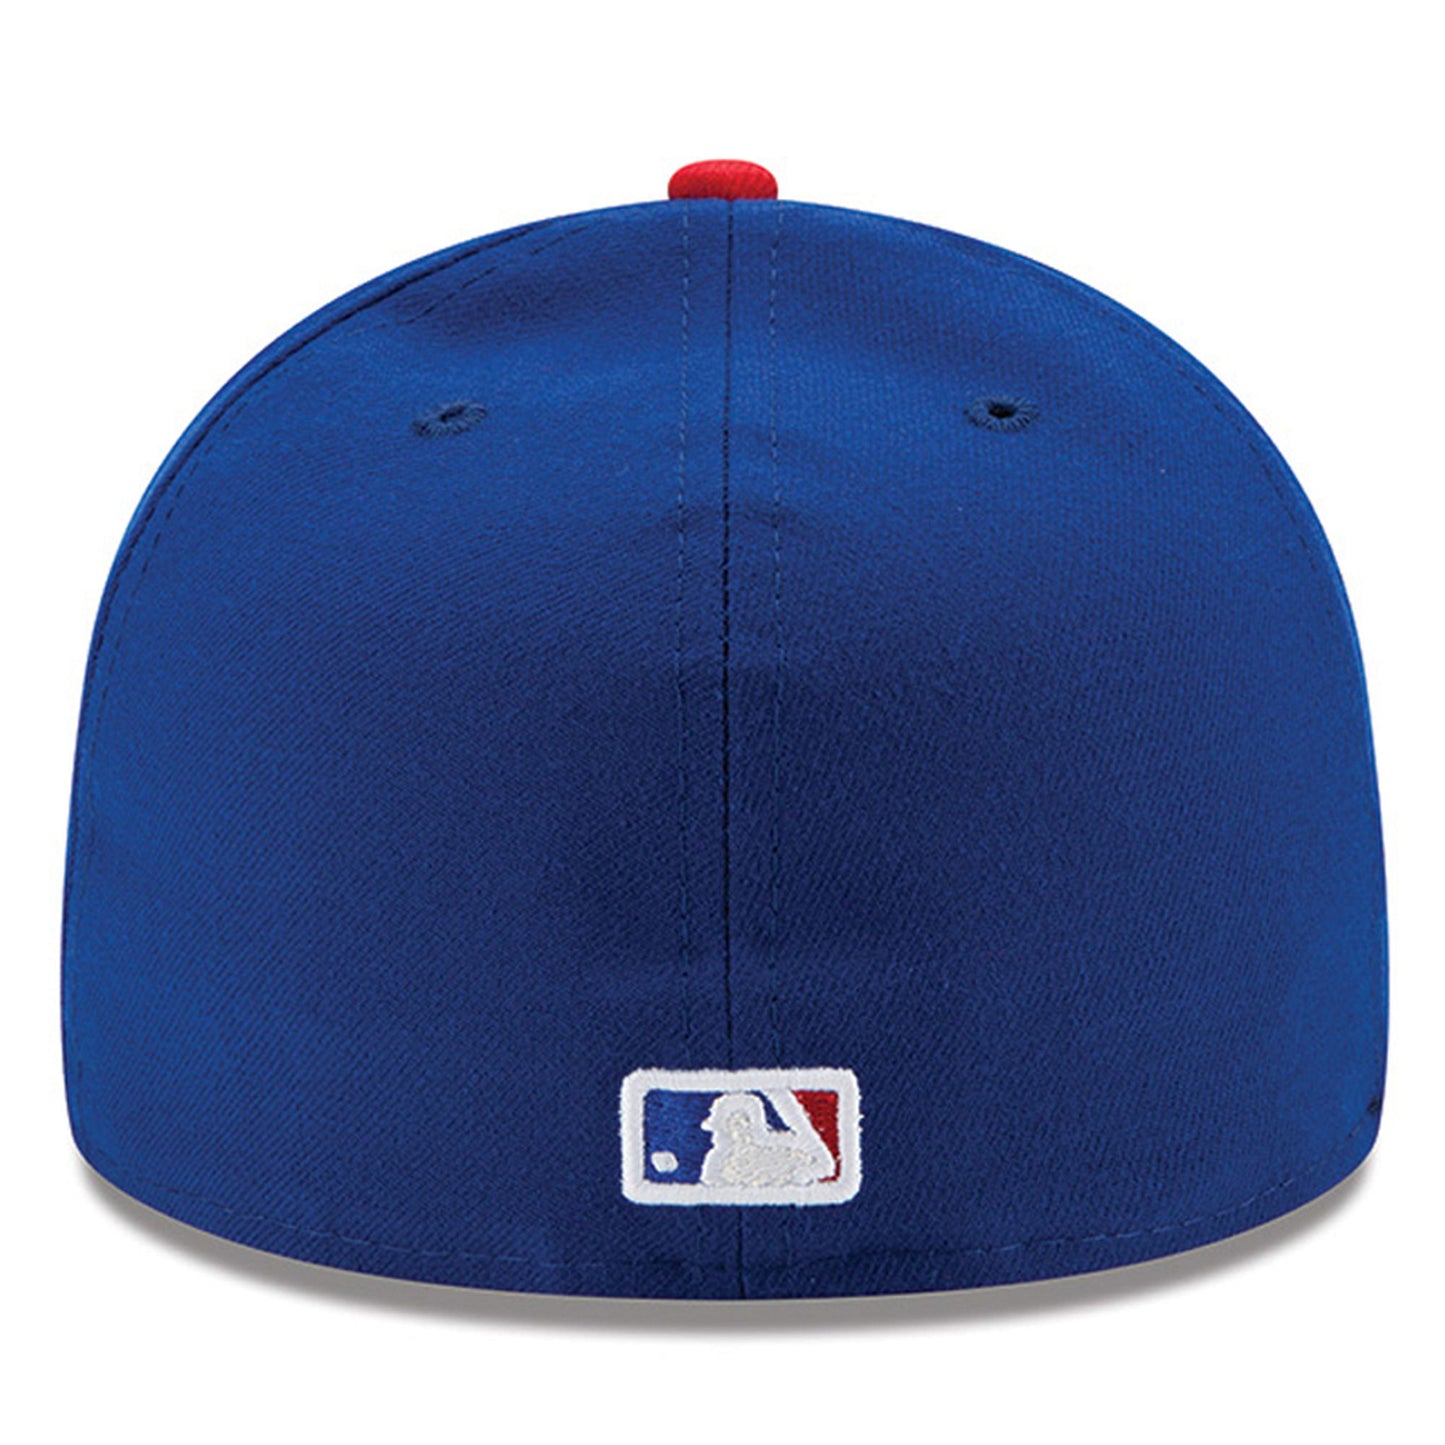 Men's Chicago Cubs New Era Royal Authentic Collection On Field Low Profile Game 59FIFTY Fitted Hat